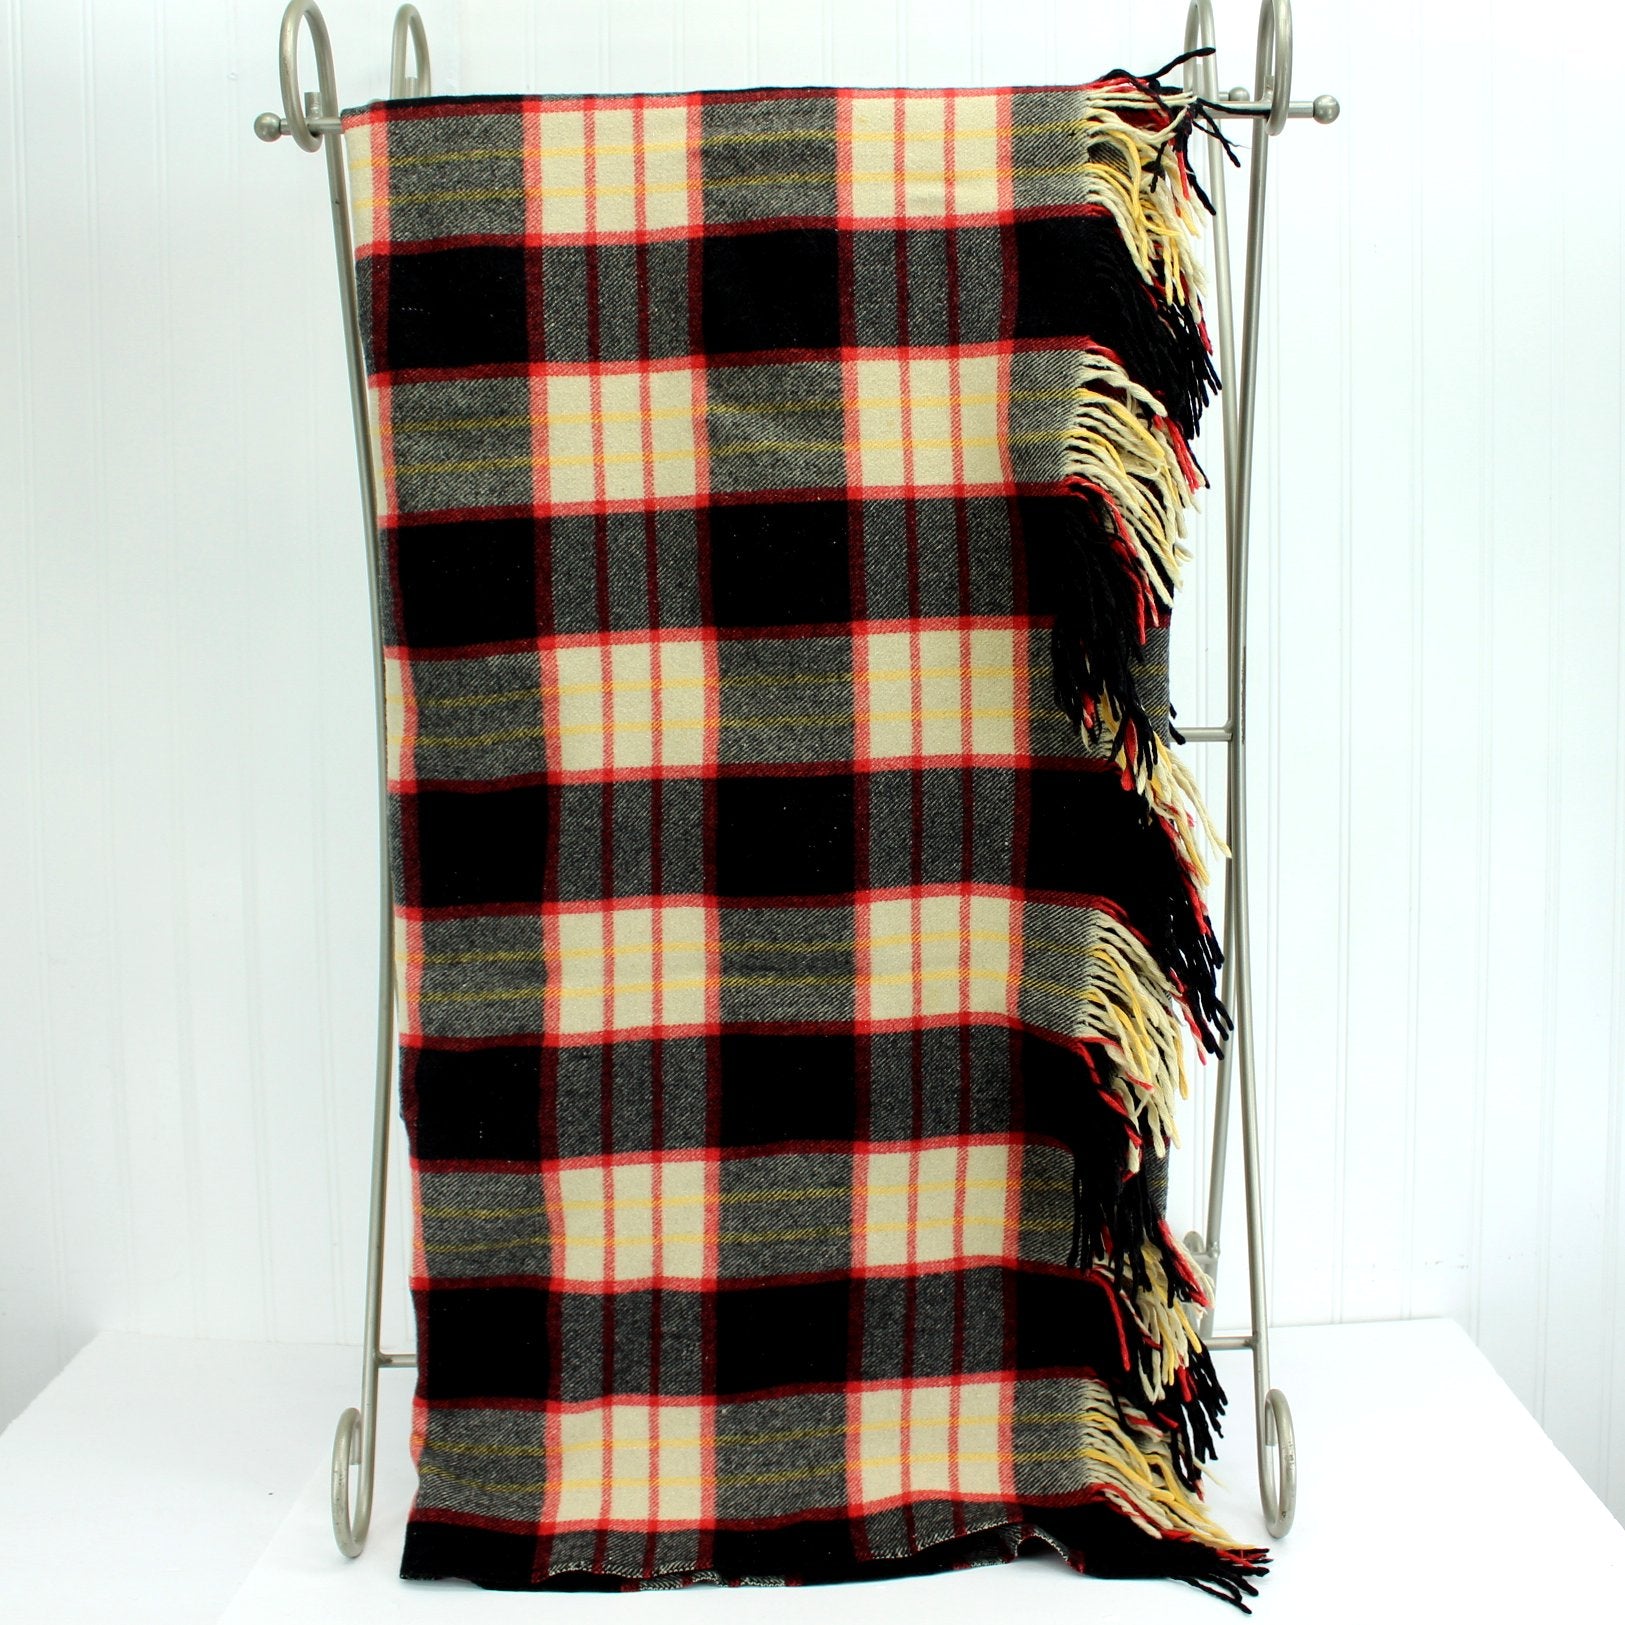 "Mister" Fringed Estate Throw Blanket Plaid Cream Red Back Yellow Fine Wool view of pattern